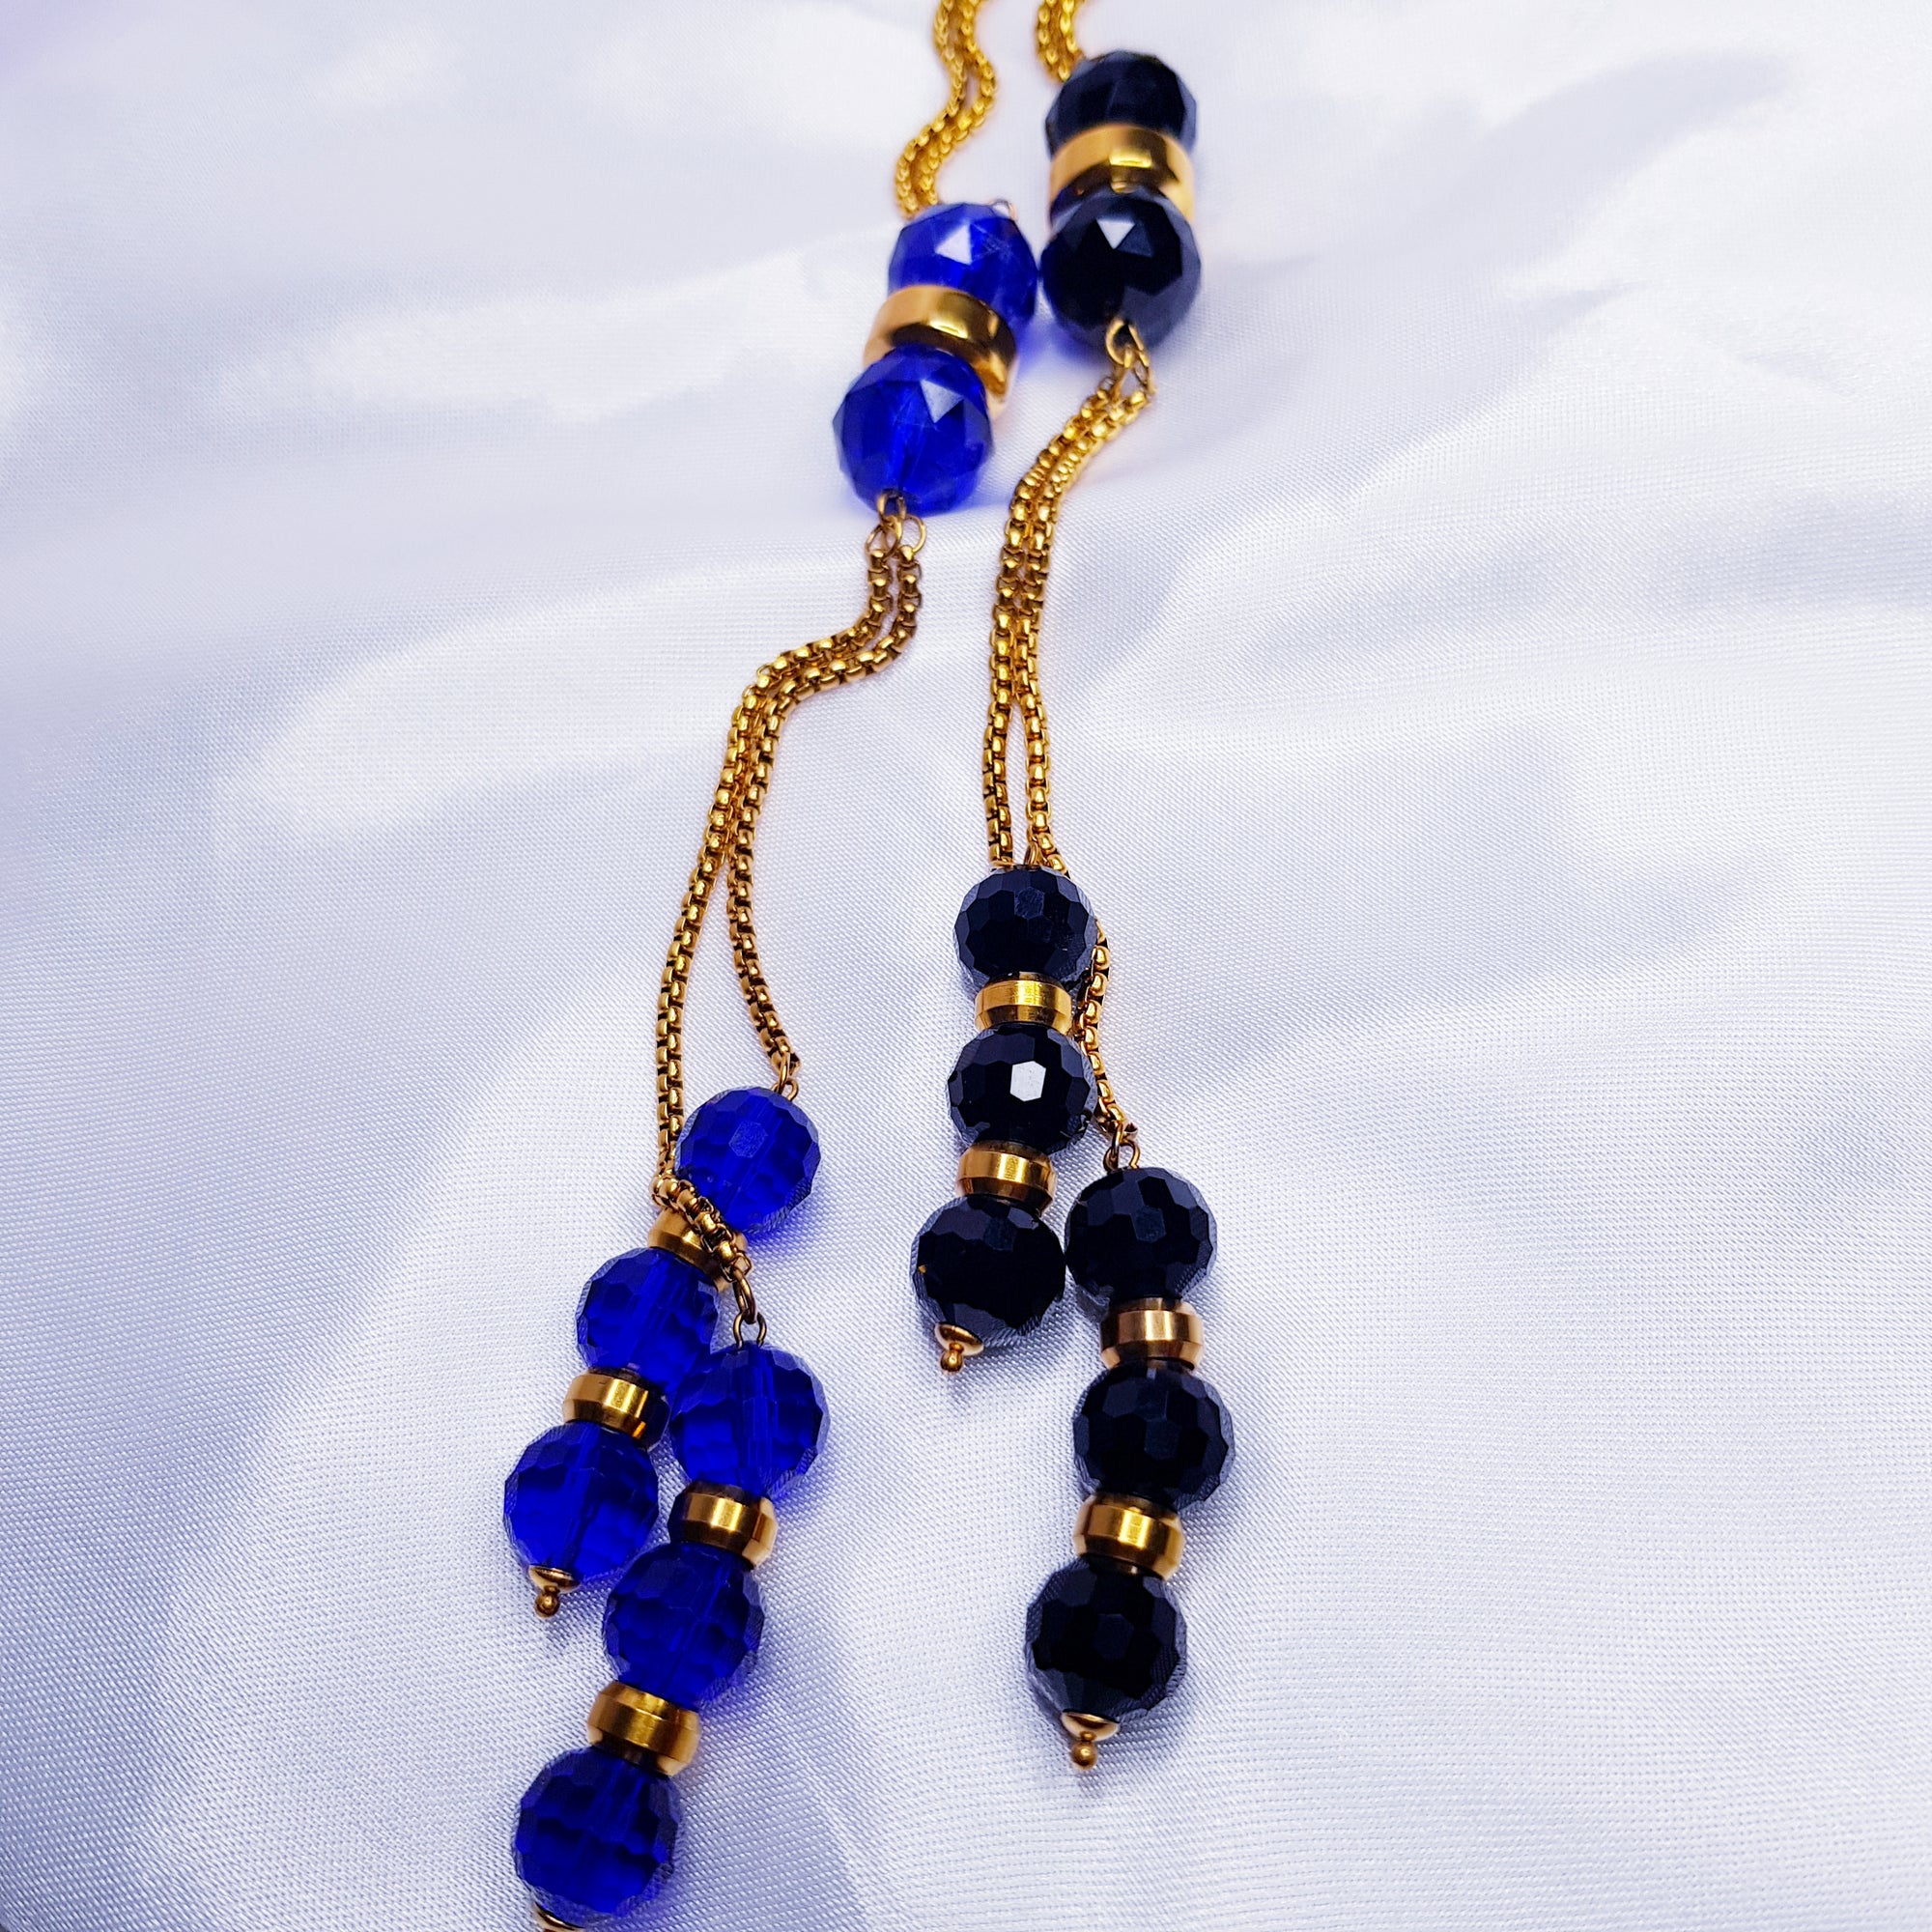 Long Beads Necklace.